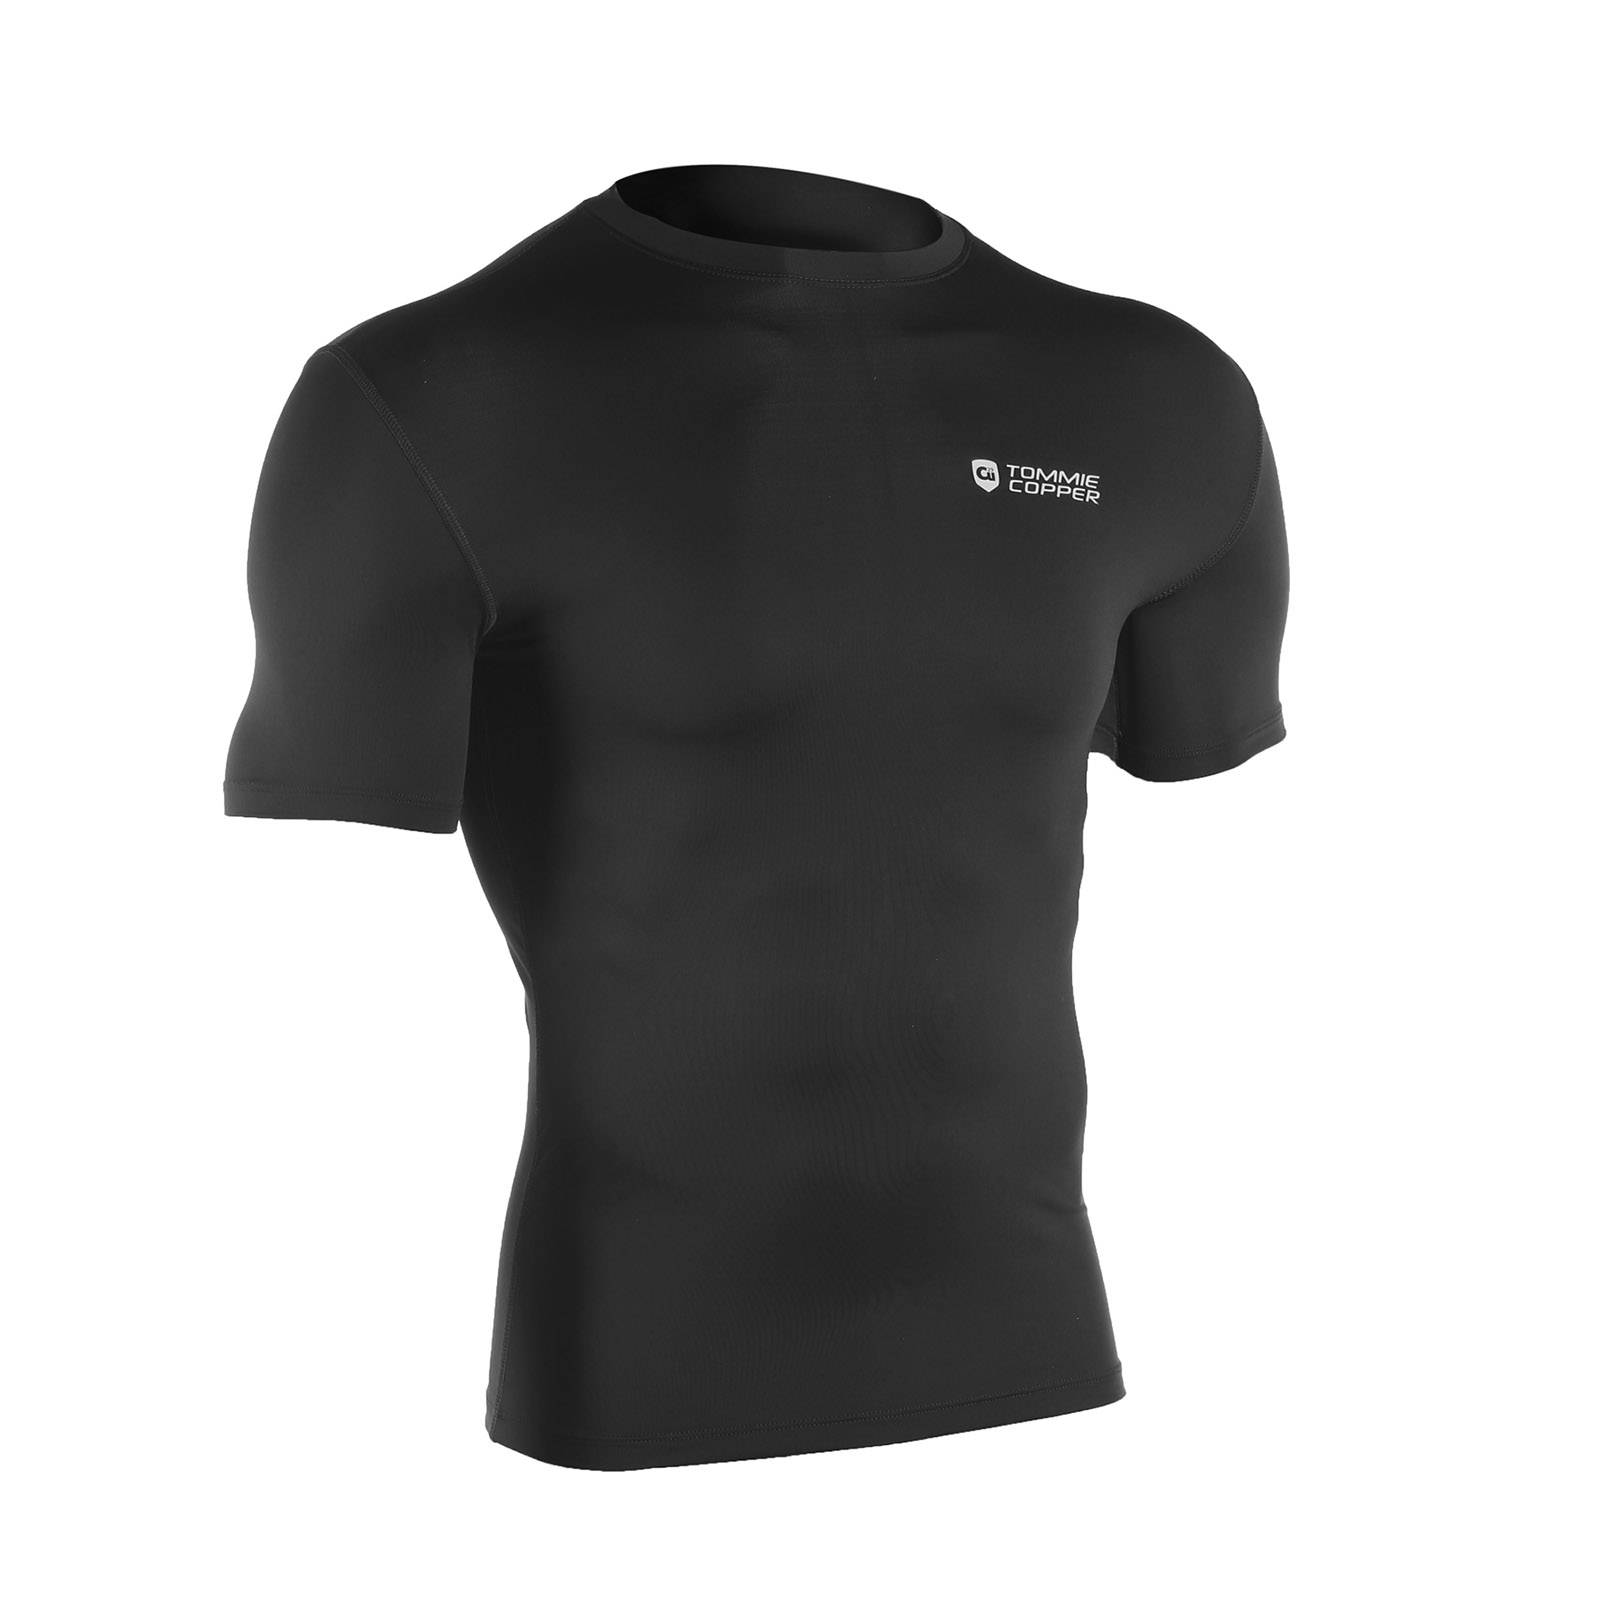 Recovery Compression Short Sleeve Shirt